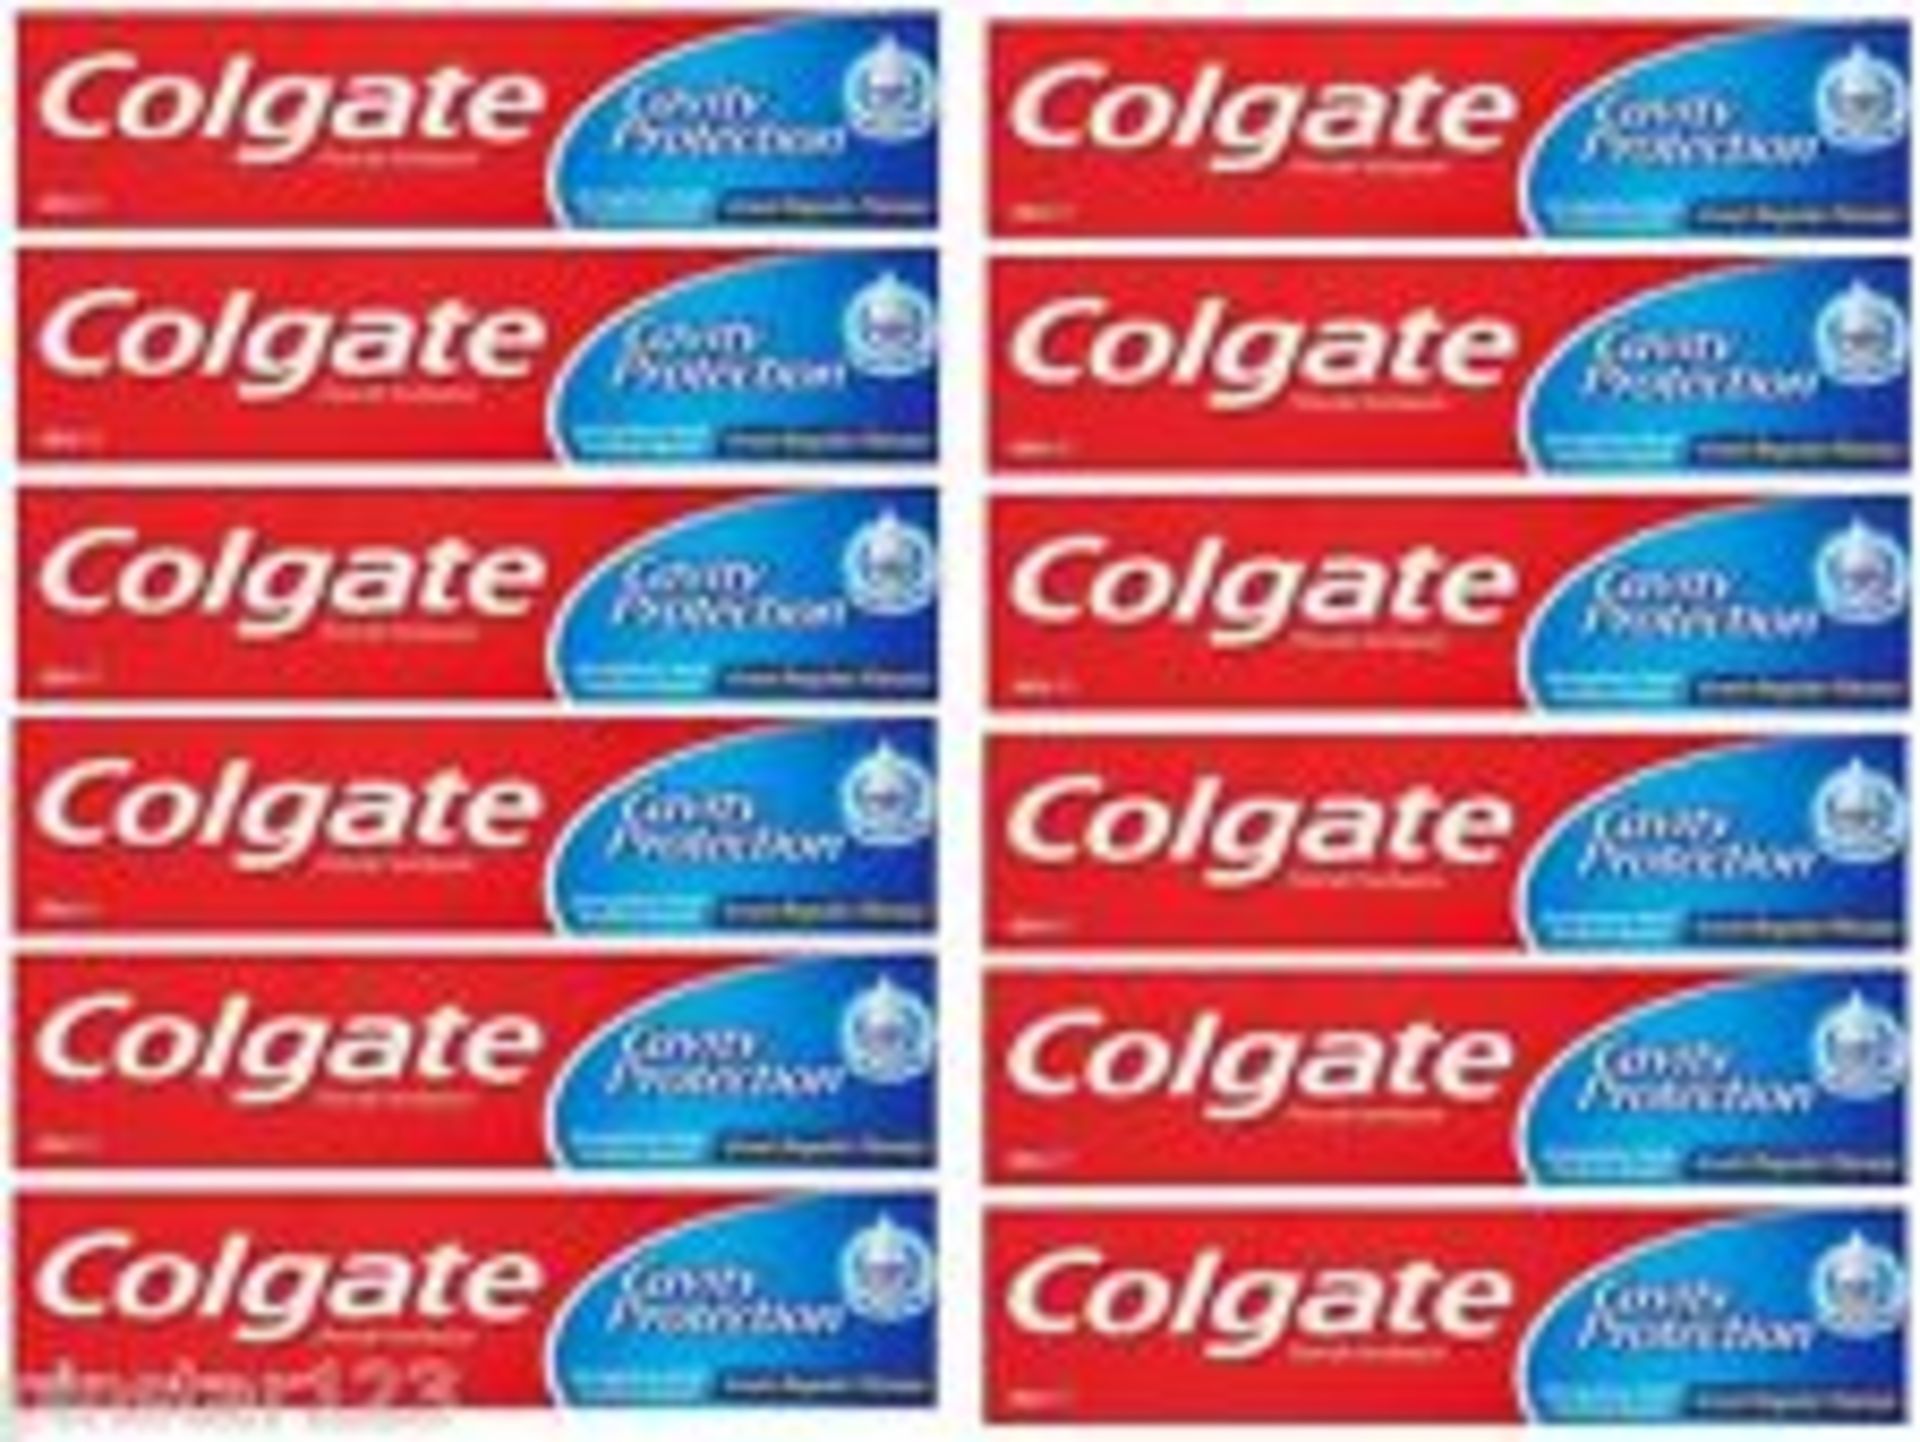 V Brand New 12 x Colgate Toothpaste Deep Clean Whitening 100ml Total Superdrug Price £12.38